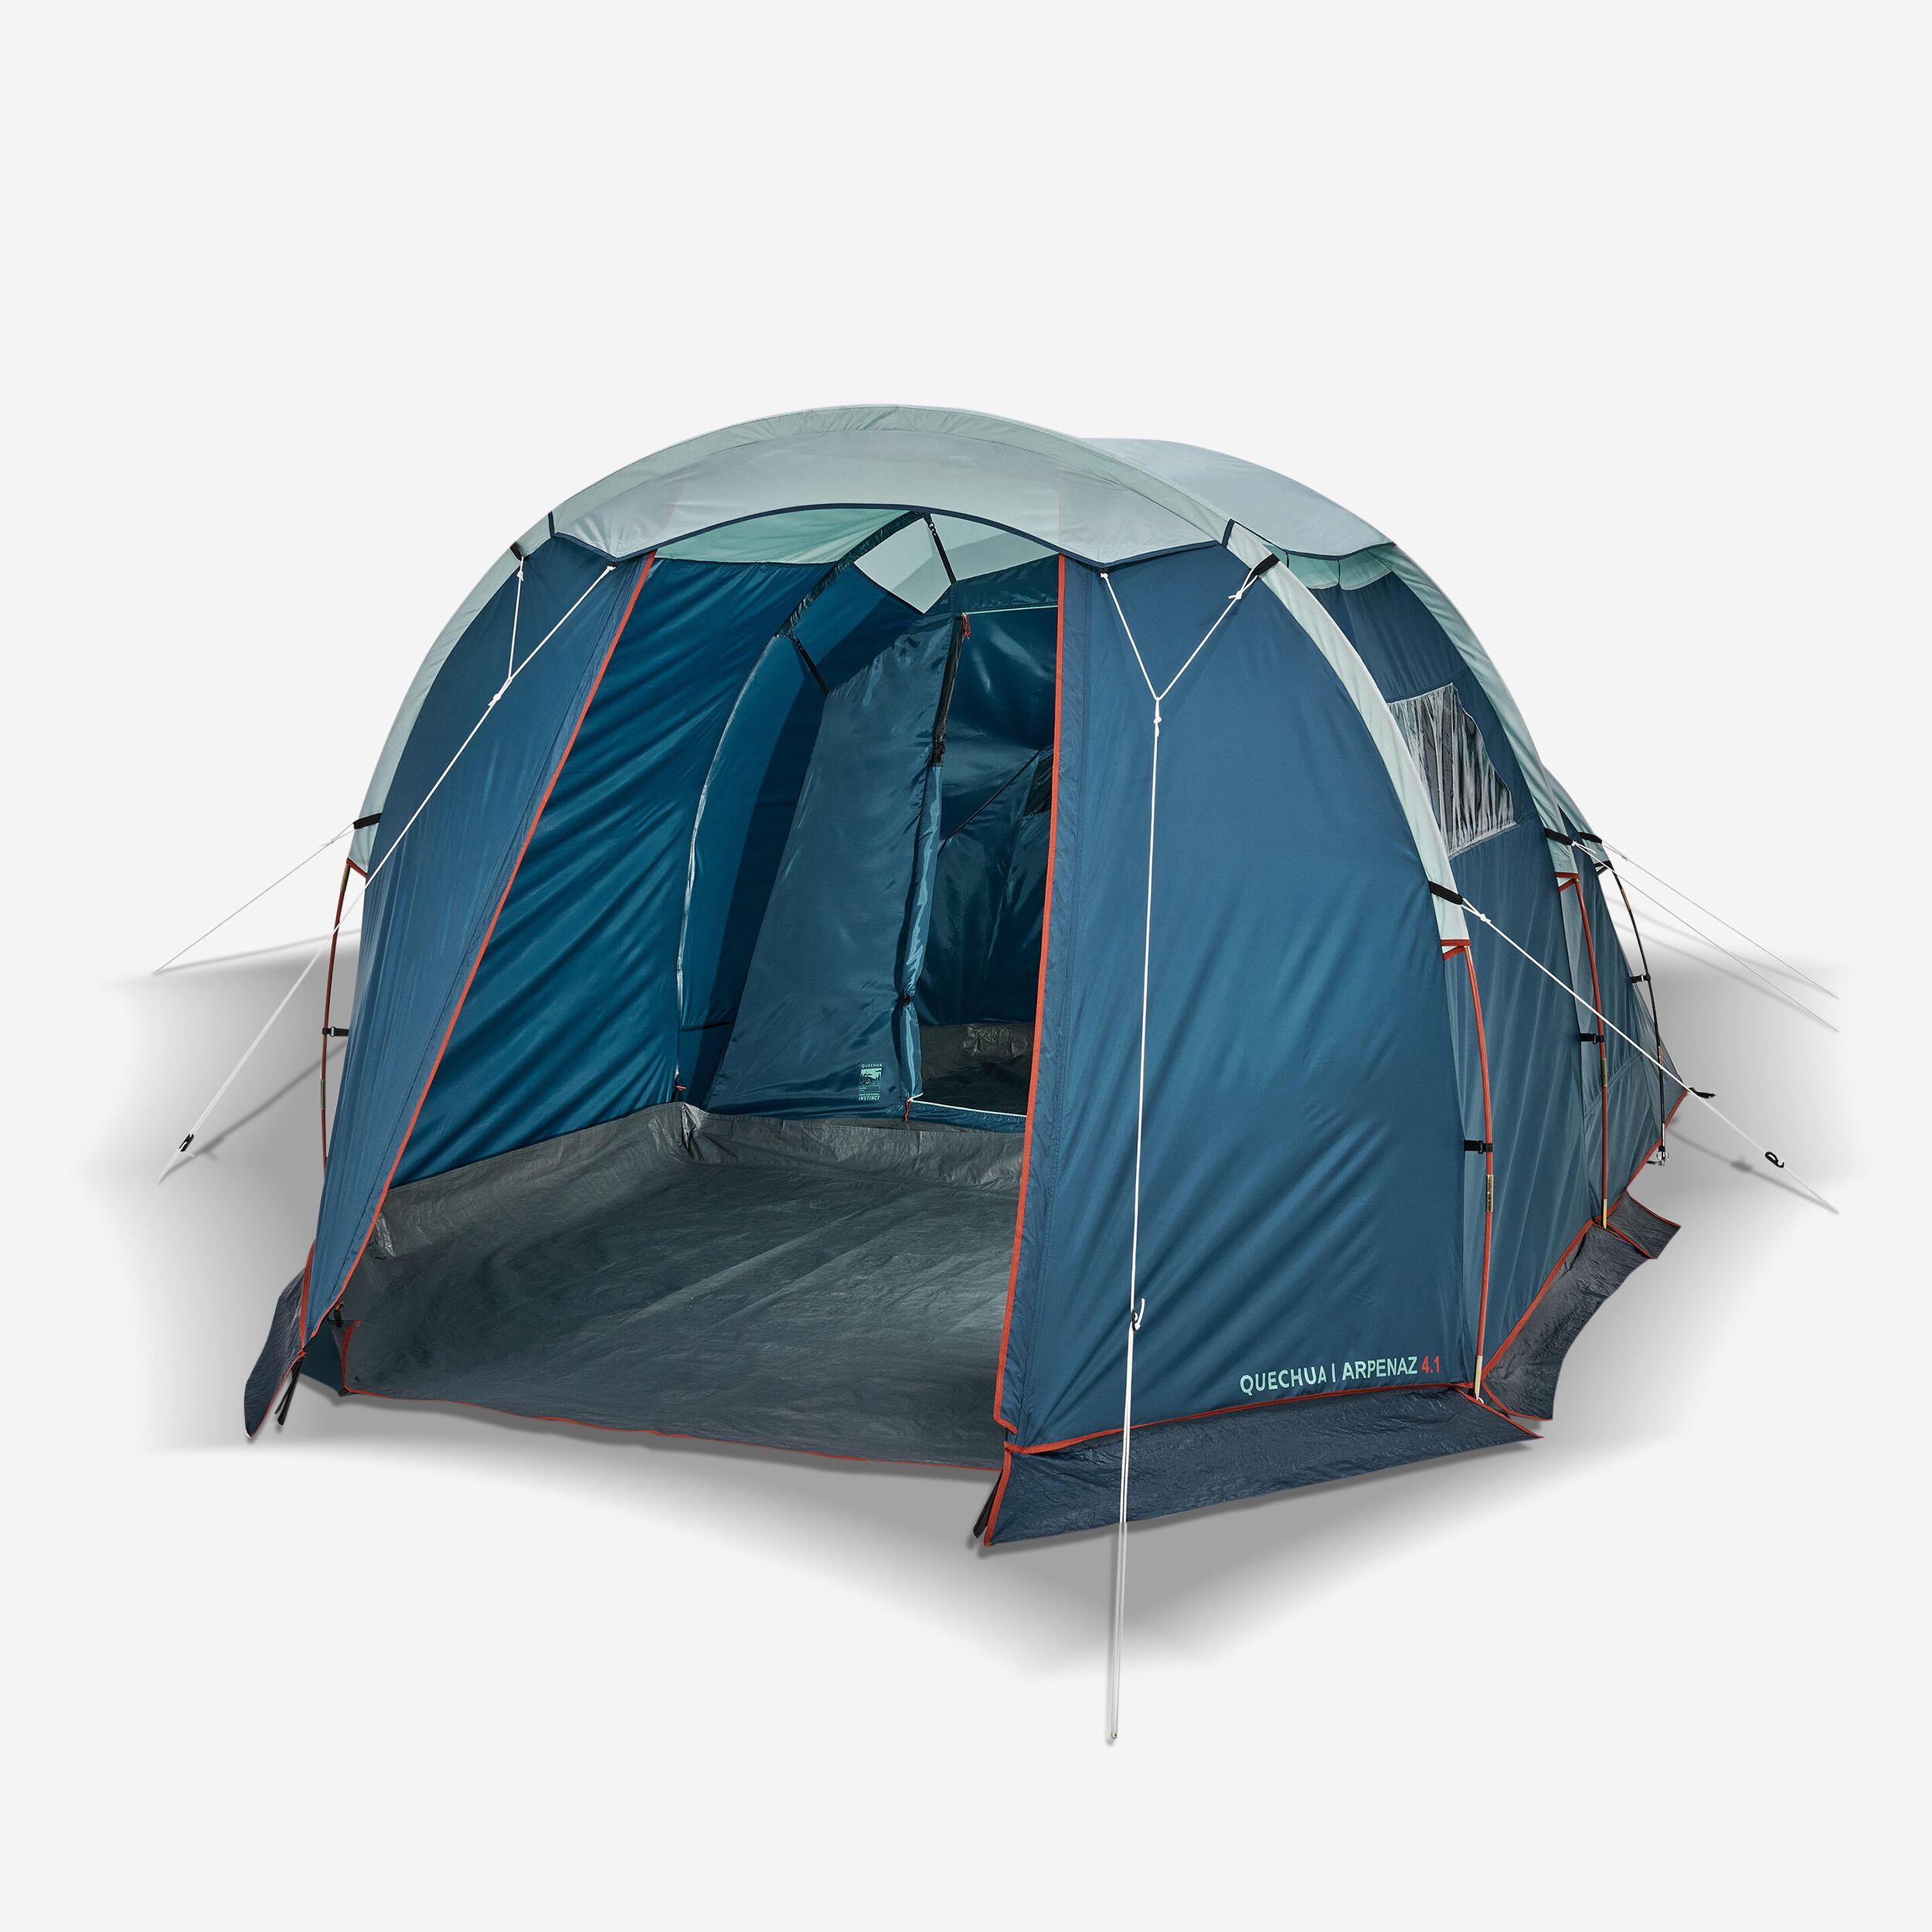 Quechua Camping Tent With Poles - Arpenaz 4.1 4 Person 1 Bedroom